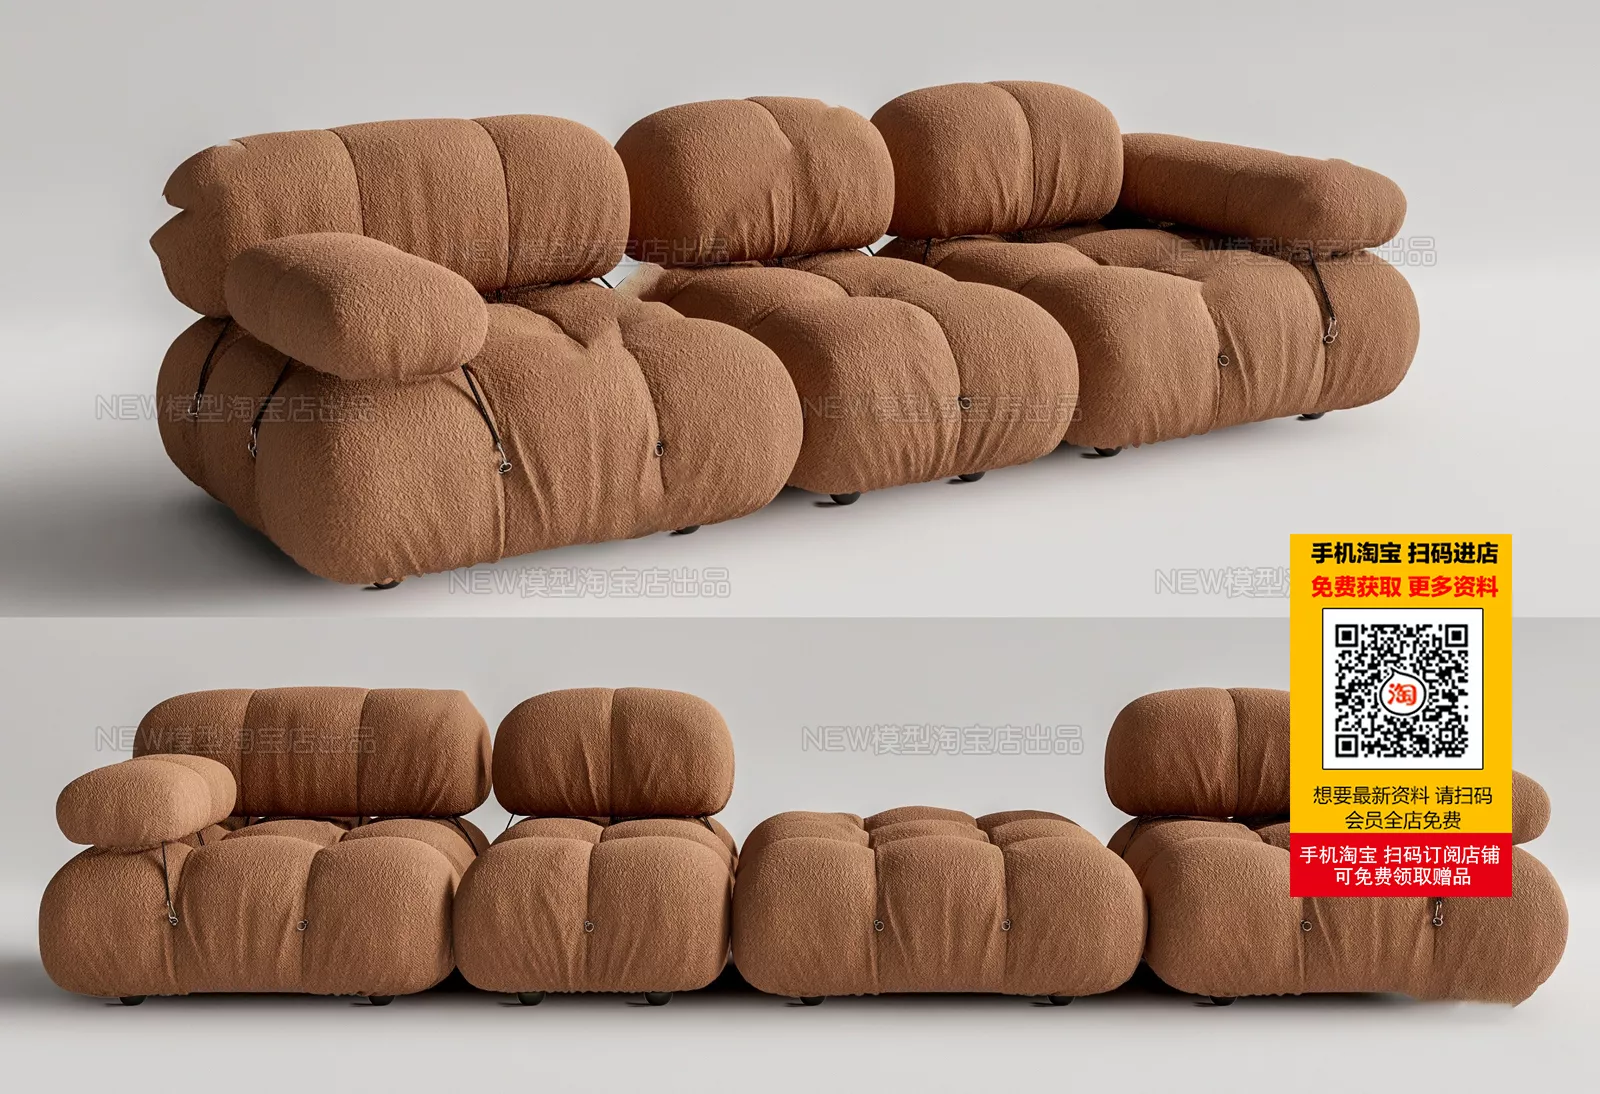 MODERN SOFA - SKETCHUP 3D MODEL - VRAY OR ENSCAPE - ID13163